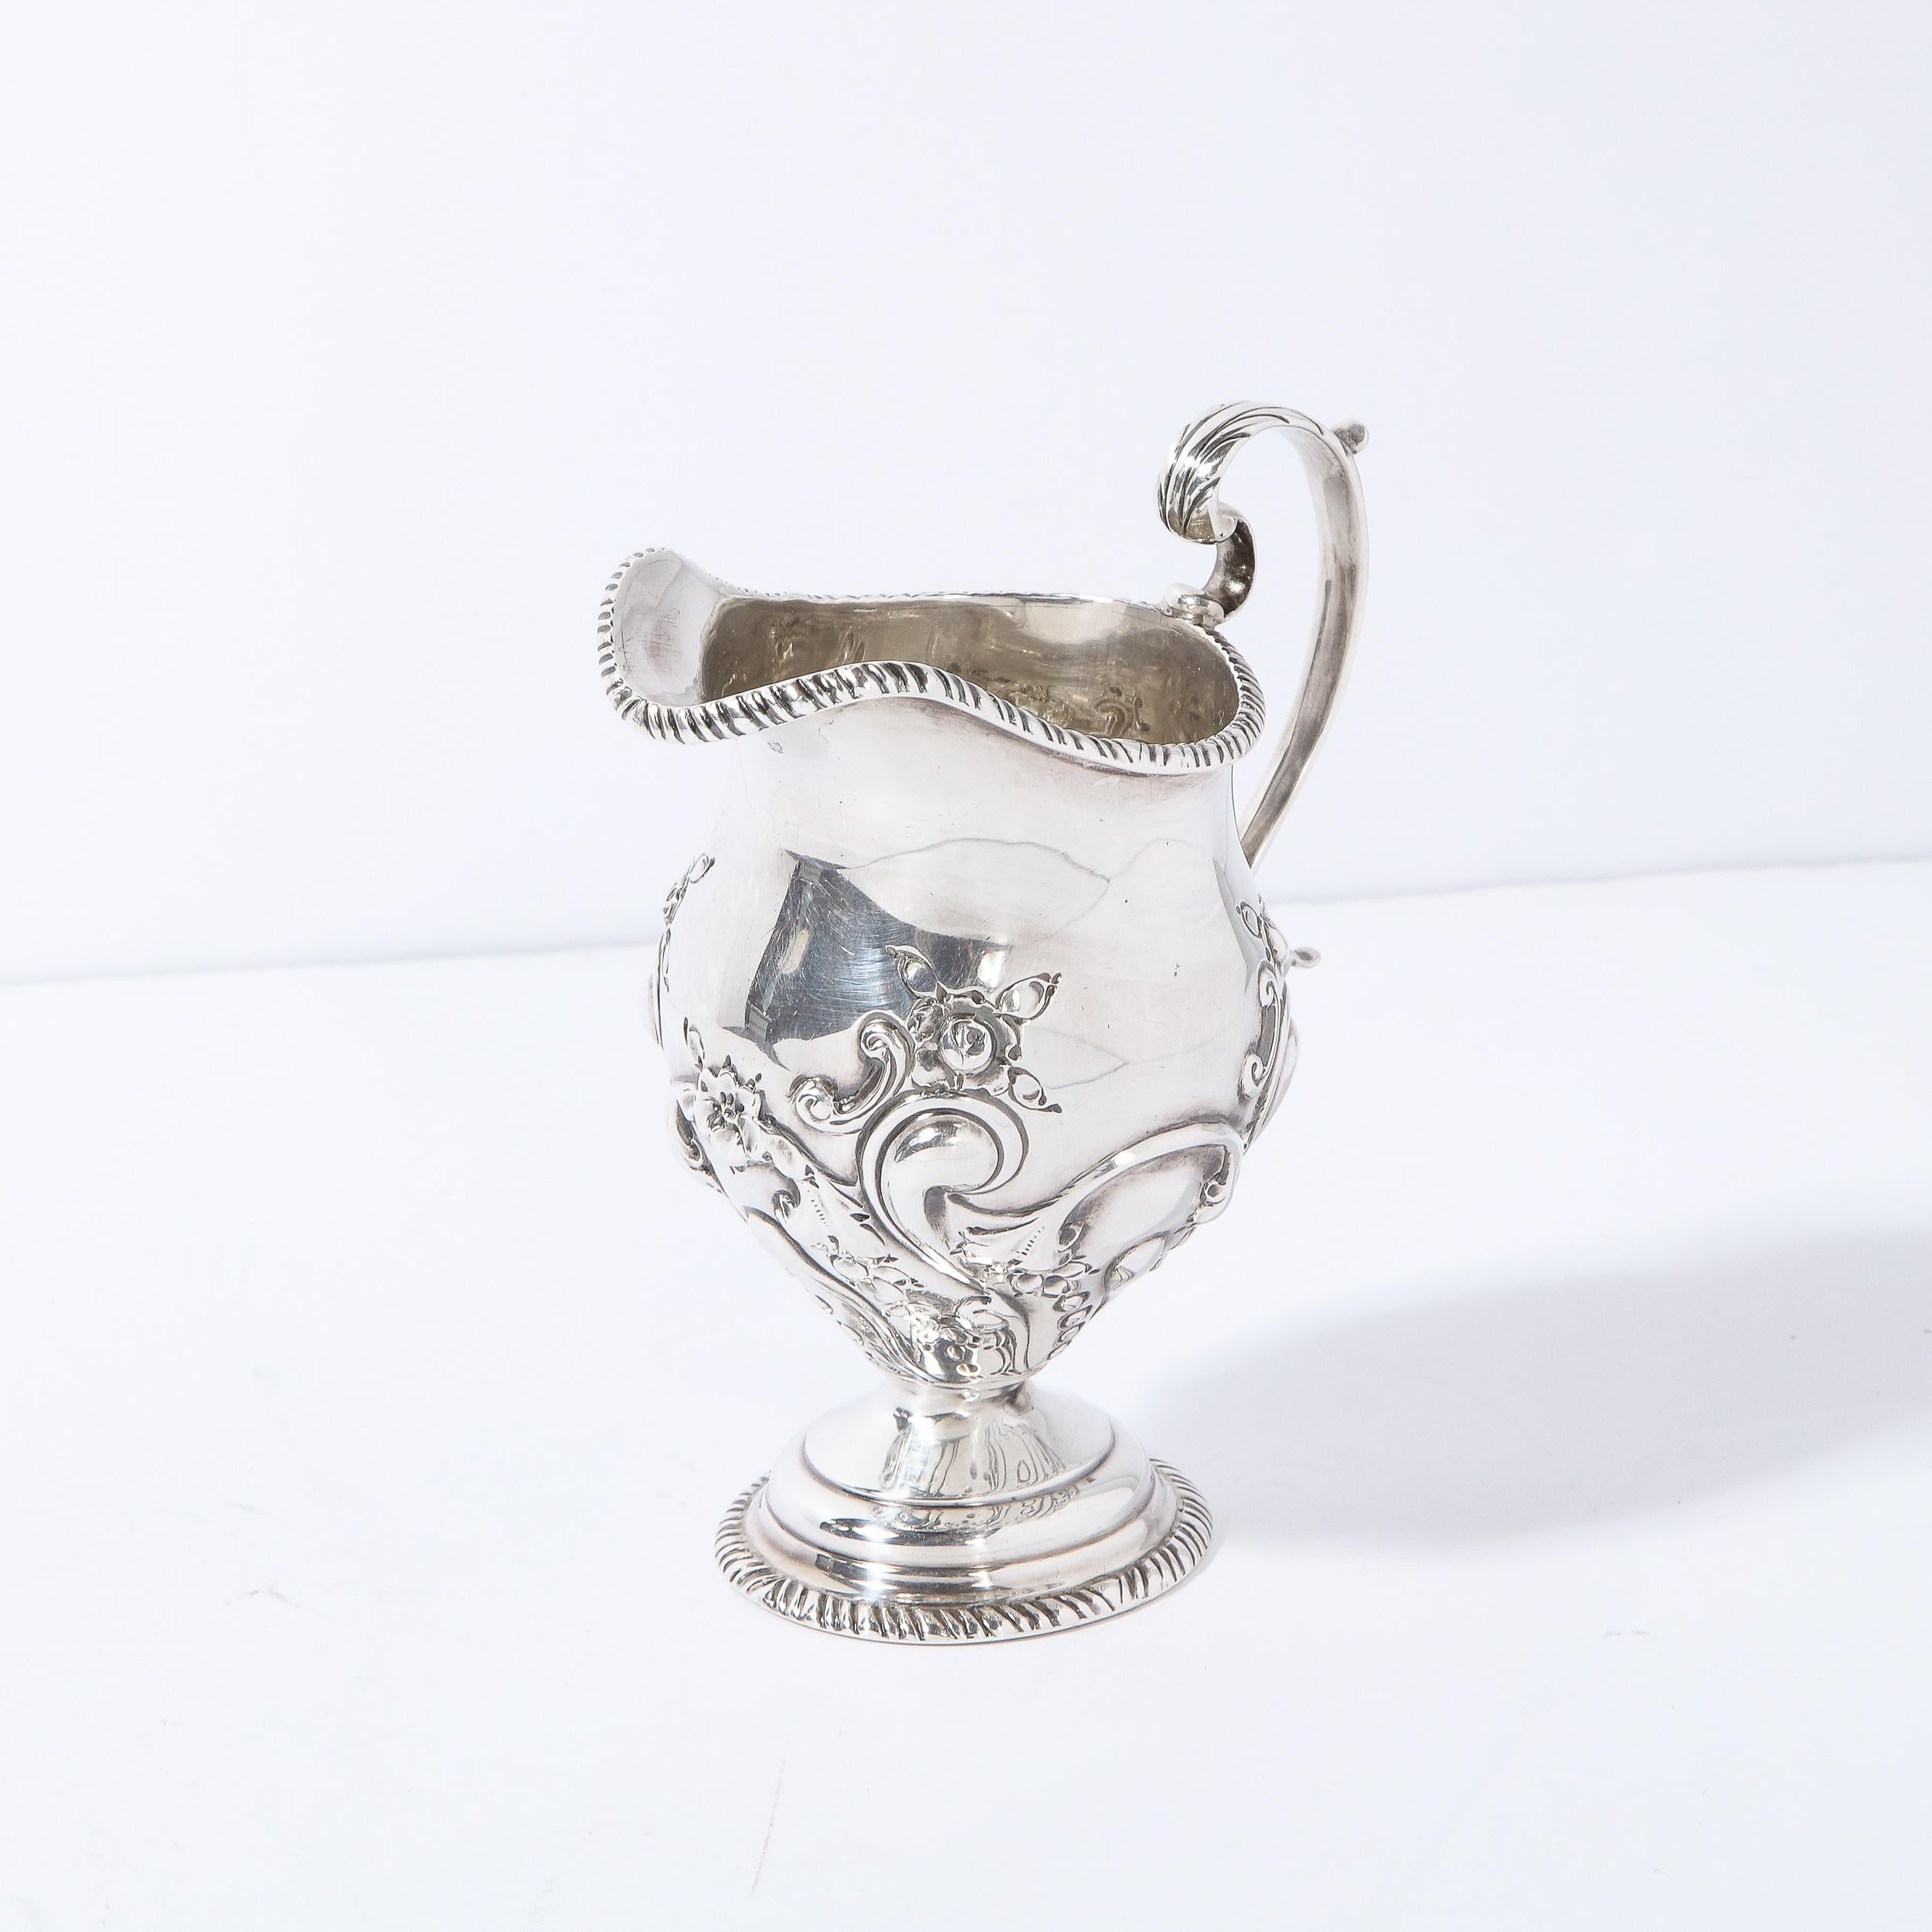 This elegant neoclassical style pitcher was realized by Charles Clement Pilling for Sibray, Hall & Co Ltd in London  circa 1900. It features a channeled base and top; a tiered fillet; a scroll form curvilinear handle; and a rounded body with a